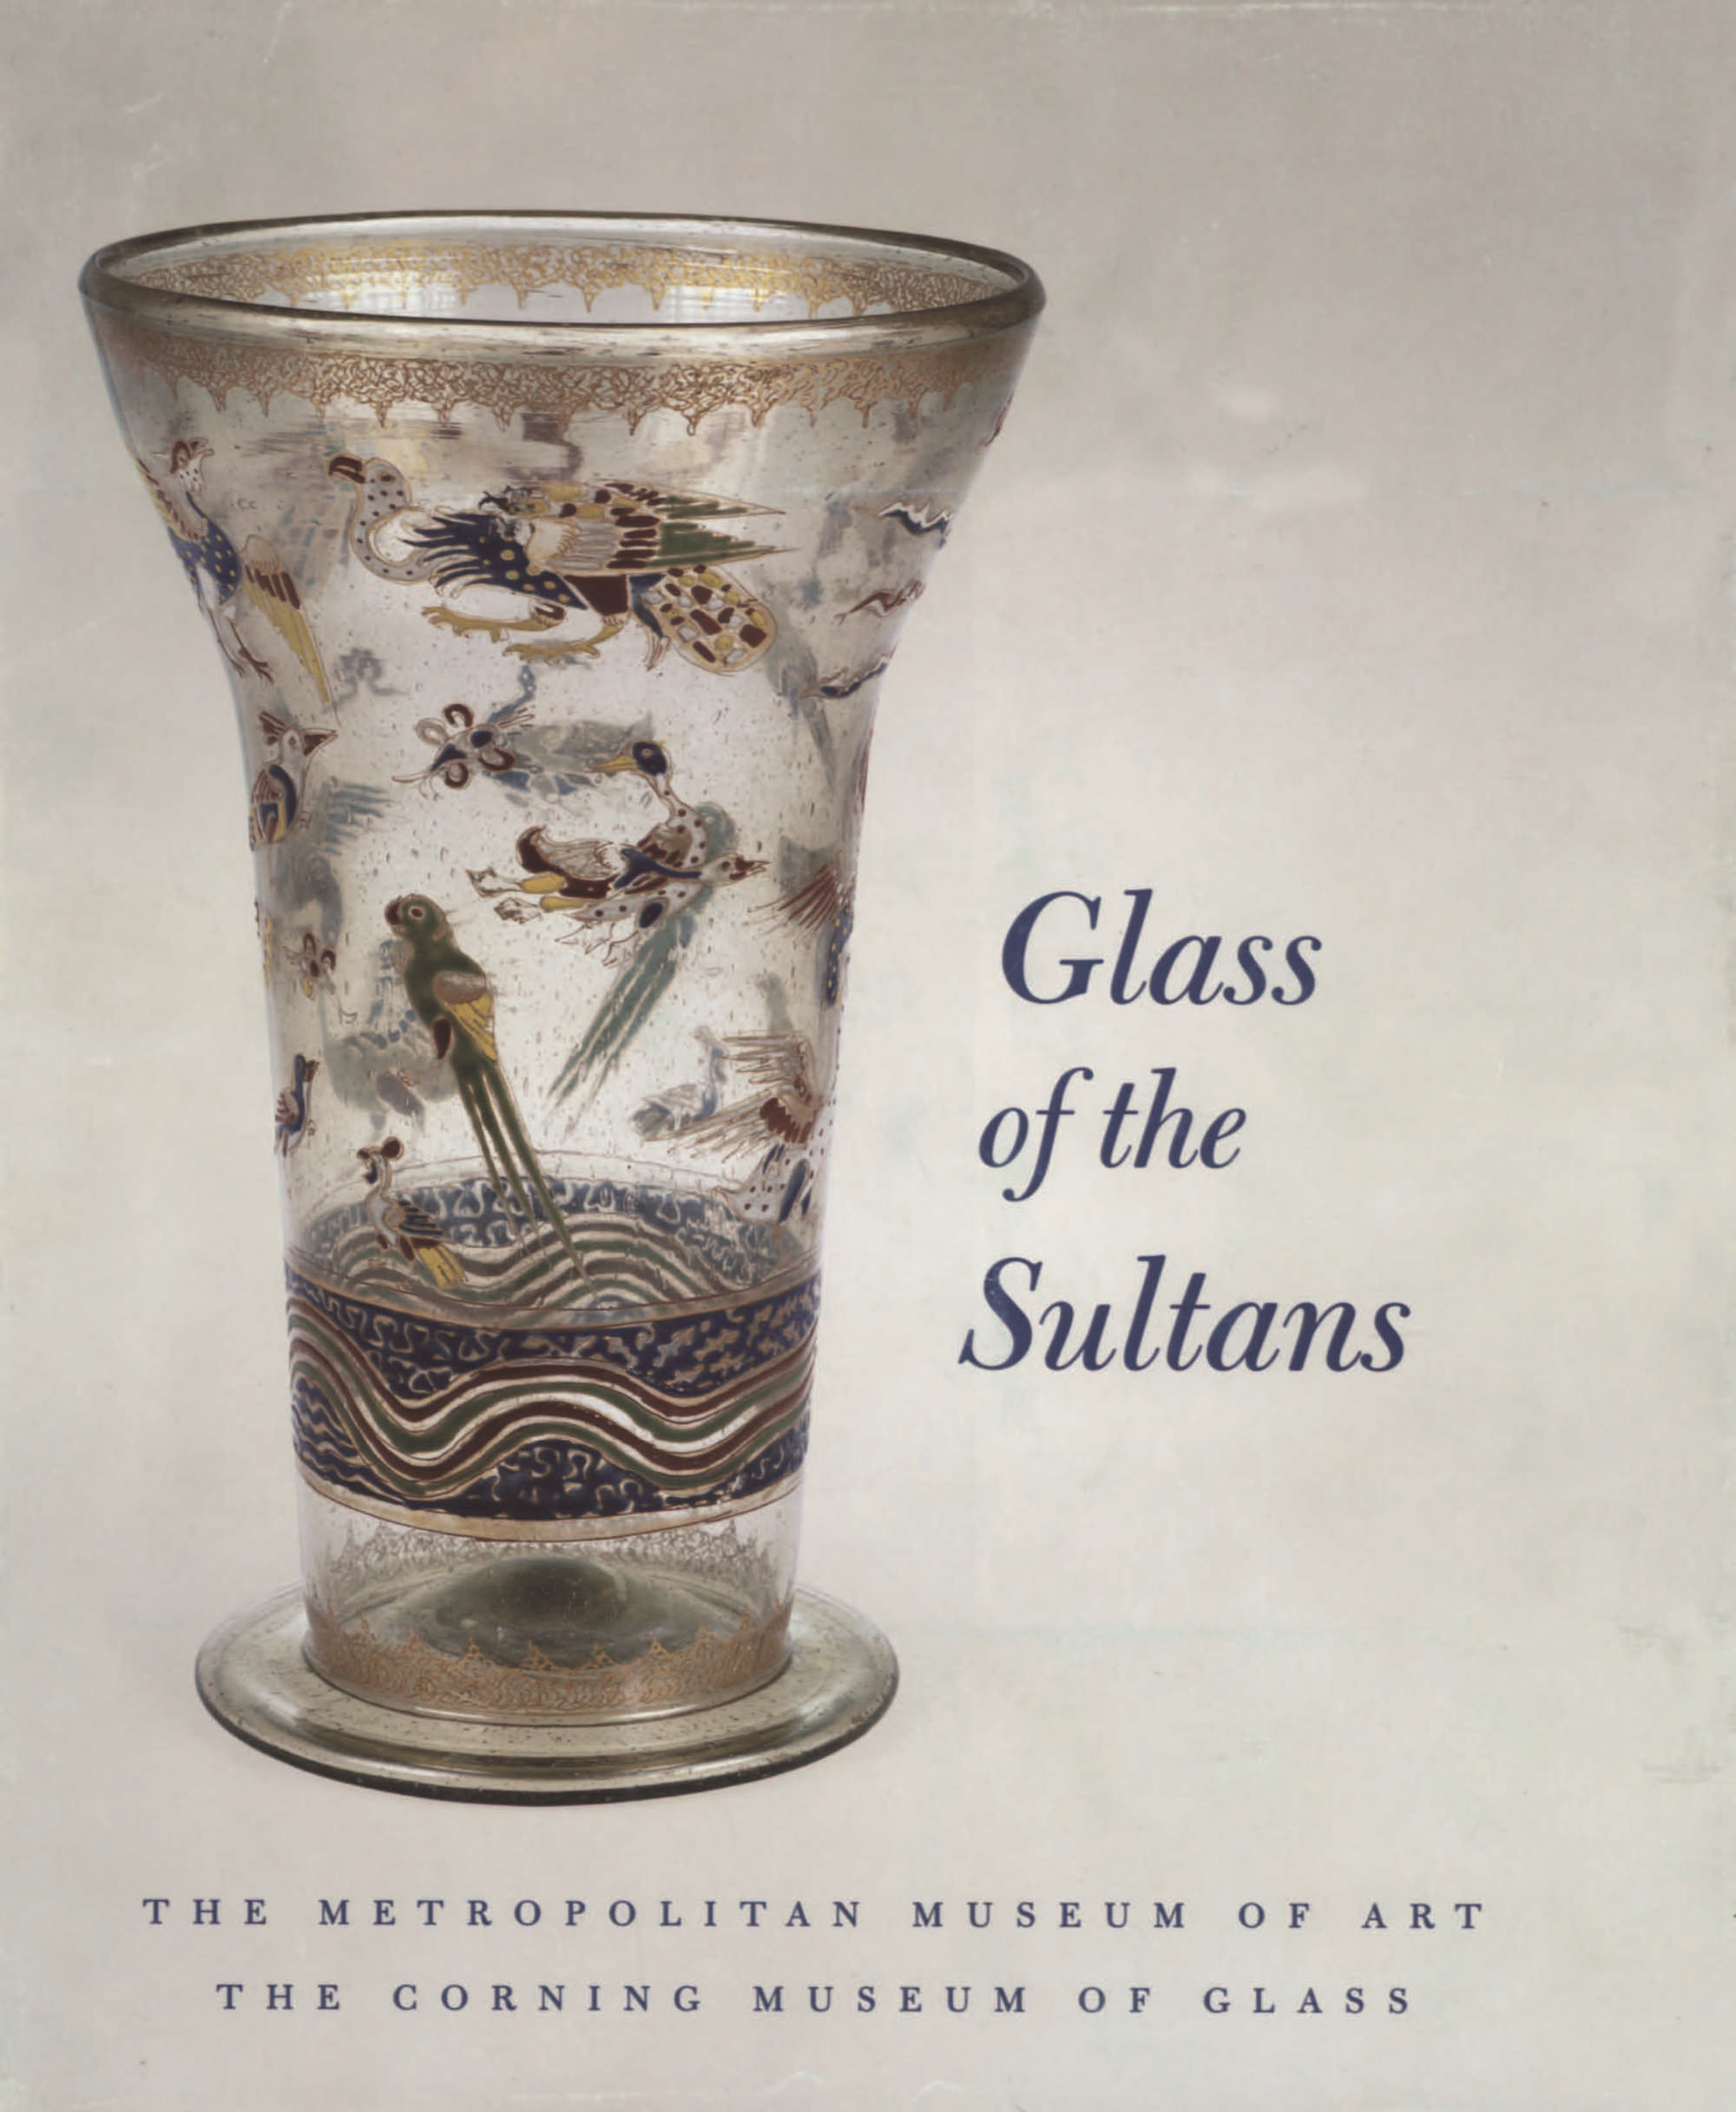 Glass of the Sultans / Carboni, Stefano, and David Whitehouse, with contributions by Robert H. Brill and William Gudenrath. — New York : The Metropolitan Museum of Art, ​2001